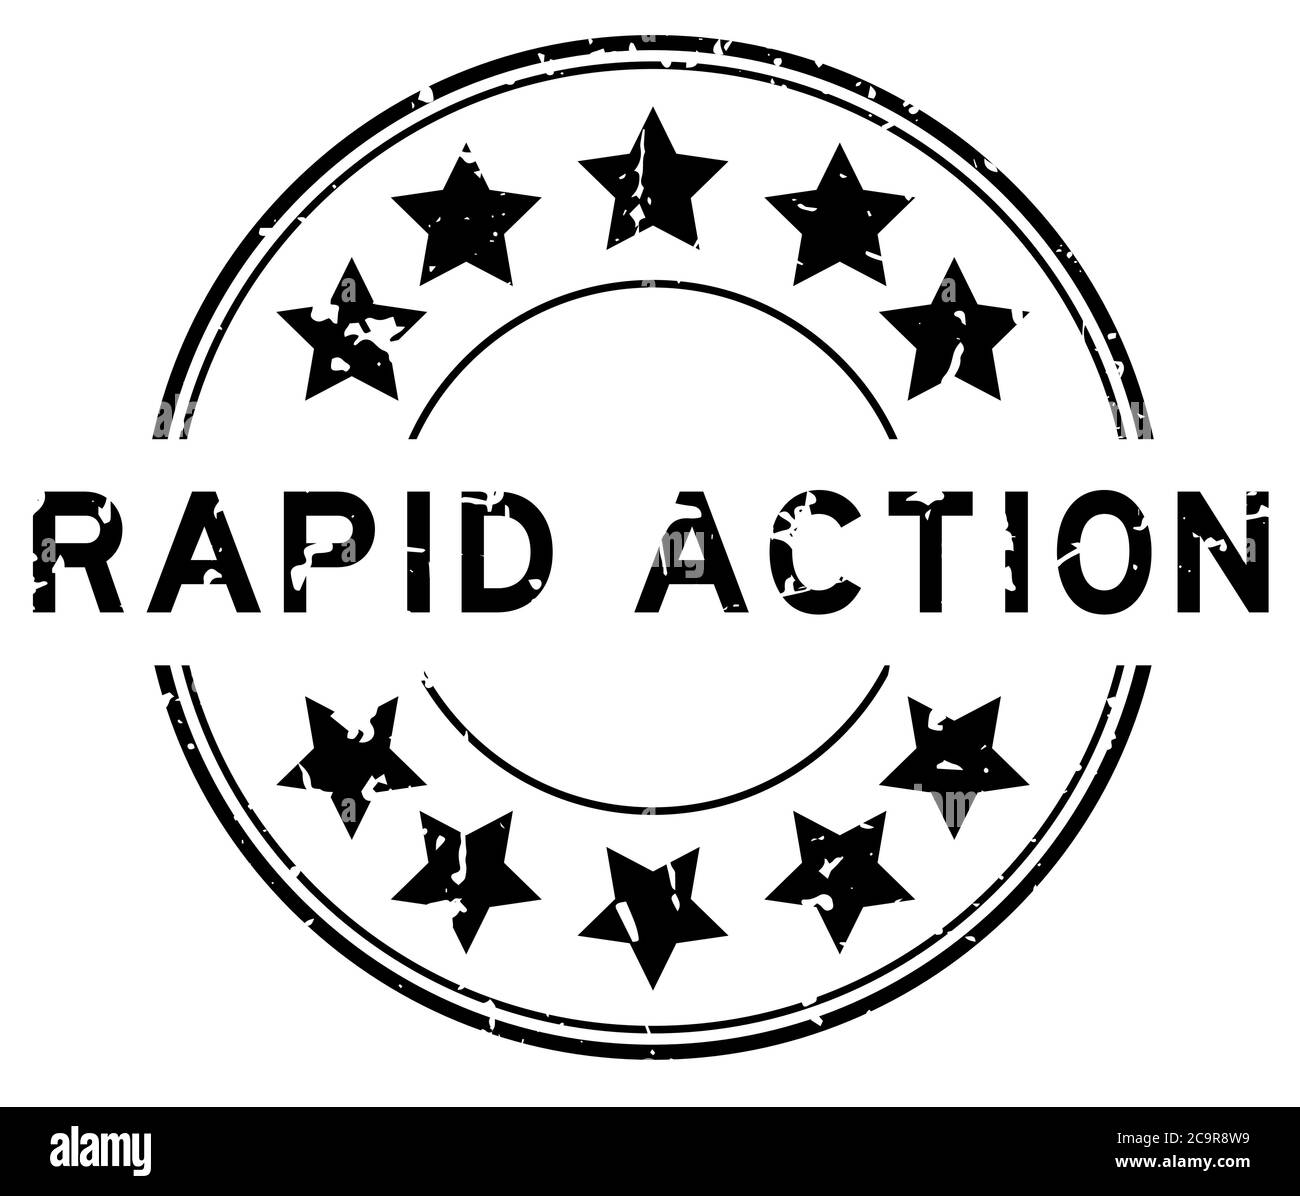 Grunge black rapid action word with star icon round rubber seal stamp on white background Stock Vector